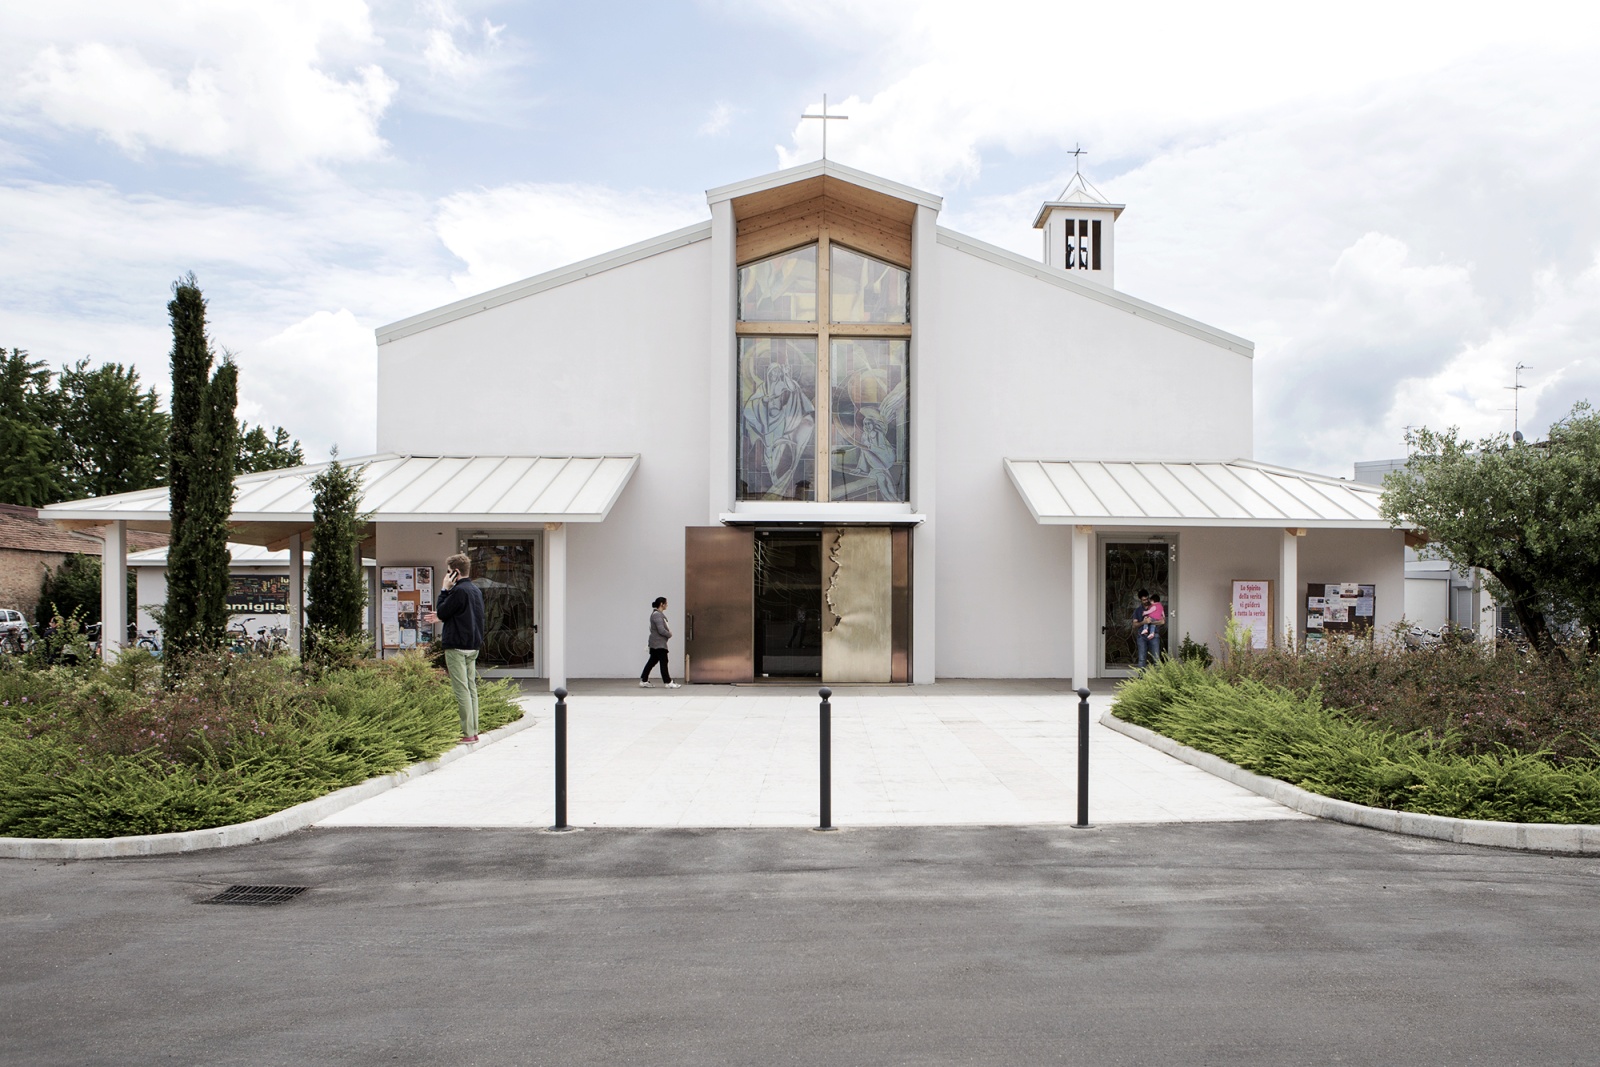 San Felice sul Panaro, Emilia Romagna Region, Italy, May 2015 - "Chiesa Nuova" in San Felice sul Panaro is the new anti-seismic church of the town. It was built entirely in wood, using x-lam panels and lamellar beams. Finally, the internal walls were covered with plasterboard.
 